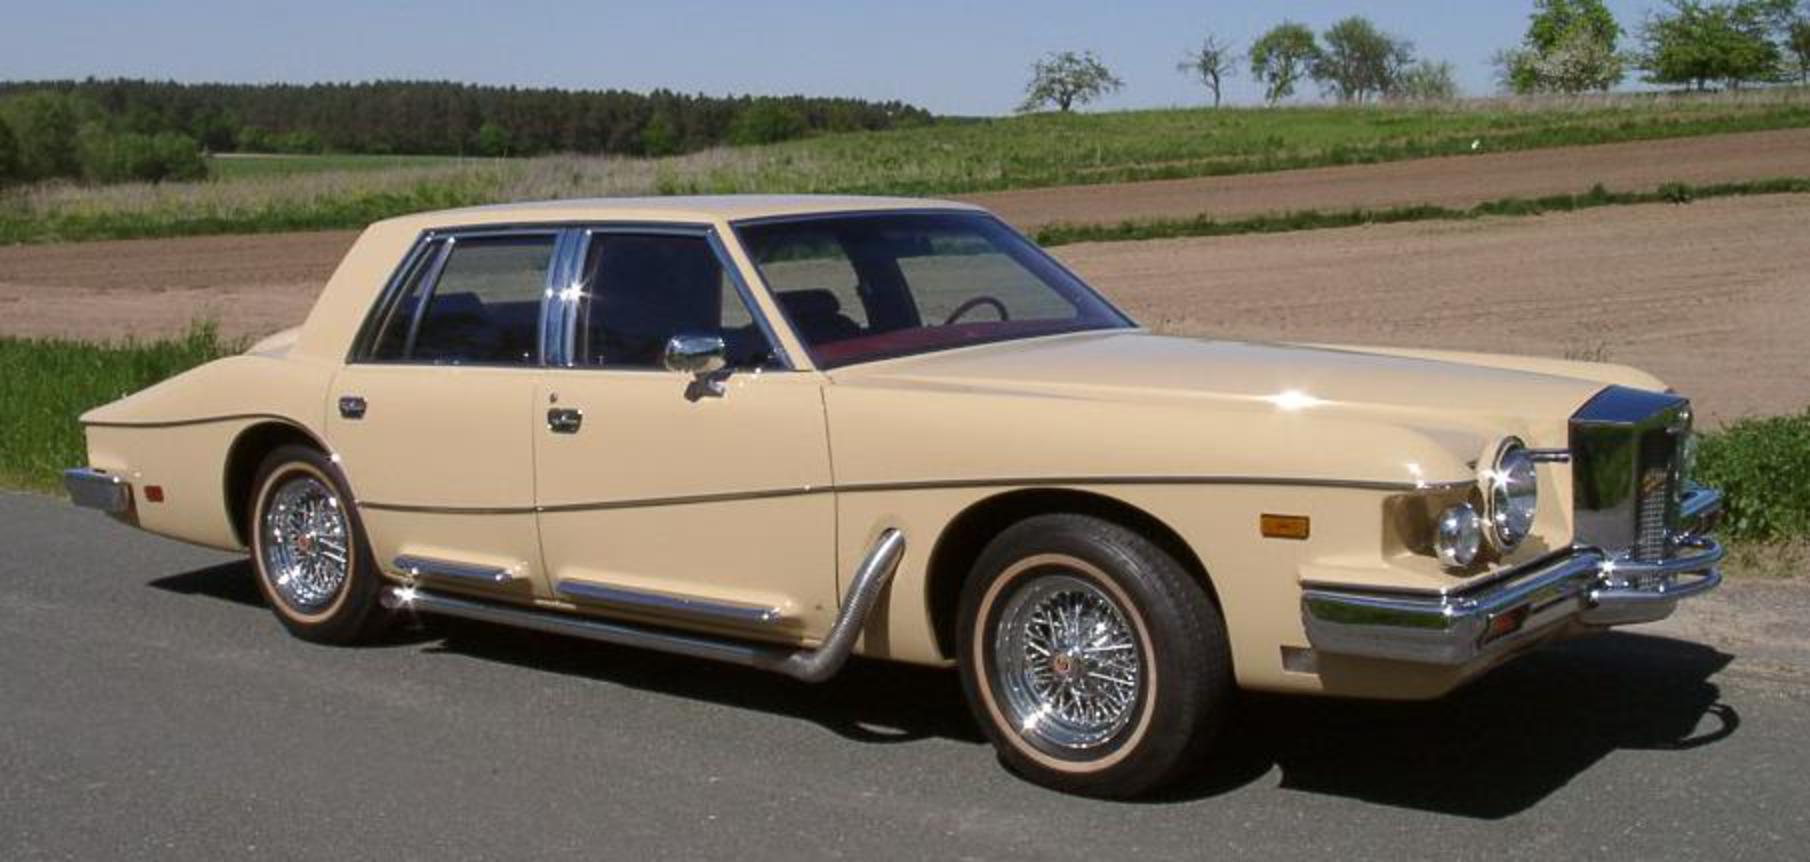 Stutz IV-Porte Photo Gallery: Photo #08 out of 10, Image Size ...